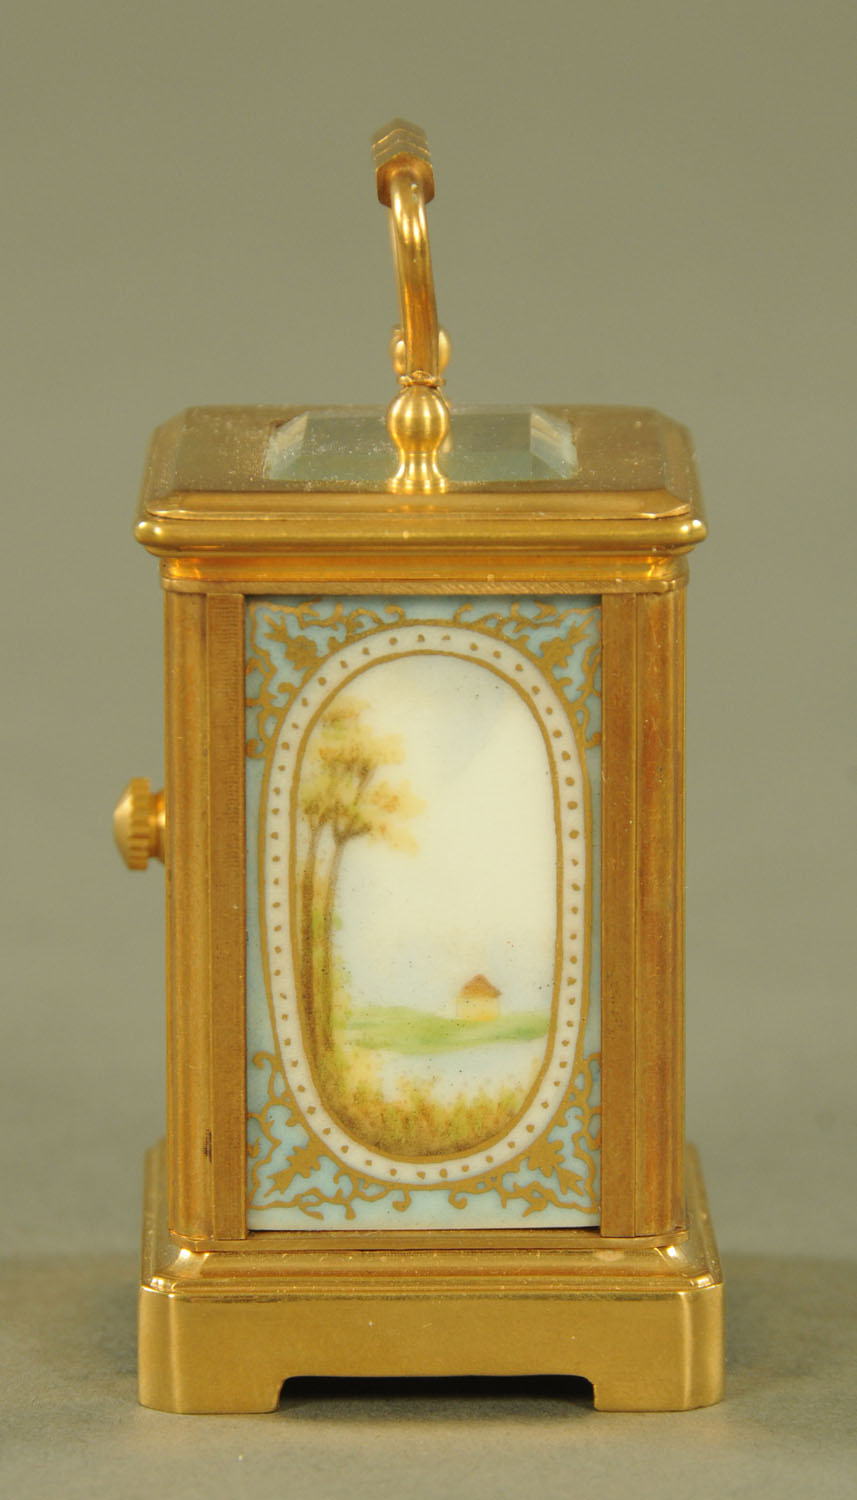 A miniature brass carriage clock, with porcelain panels, timepiece only. - Image 2 of 6